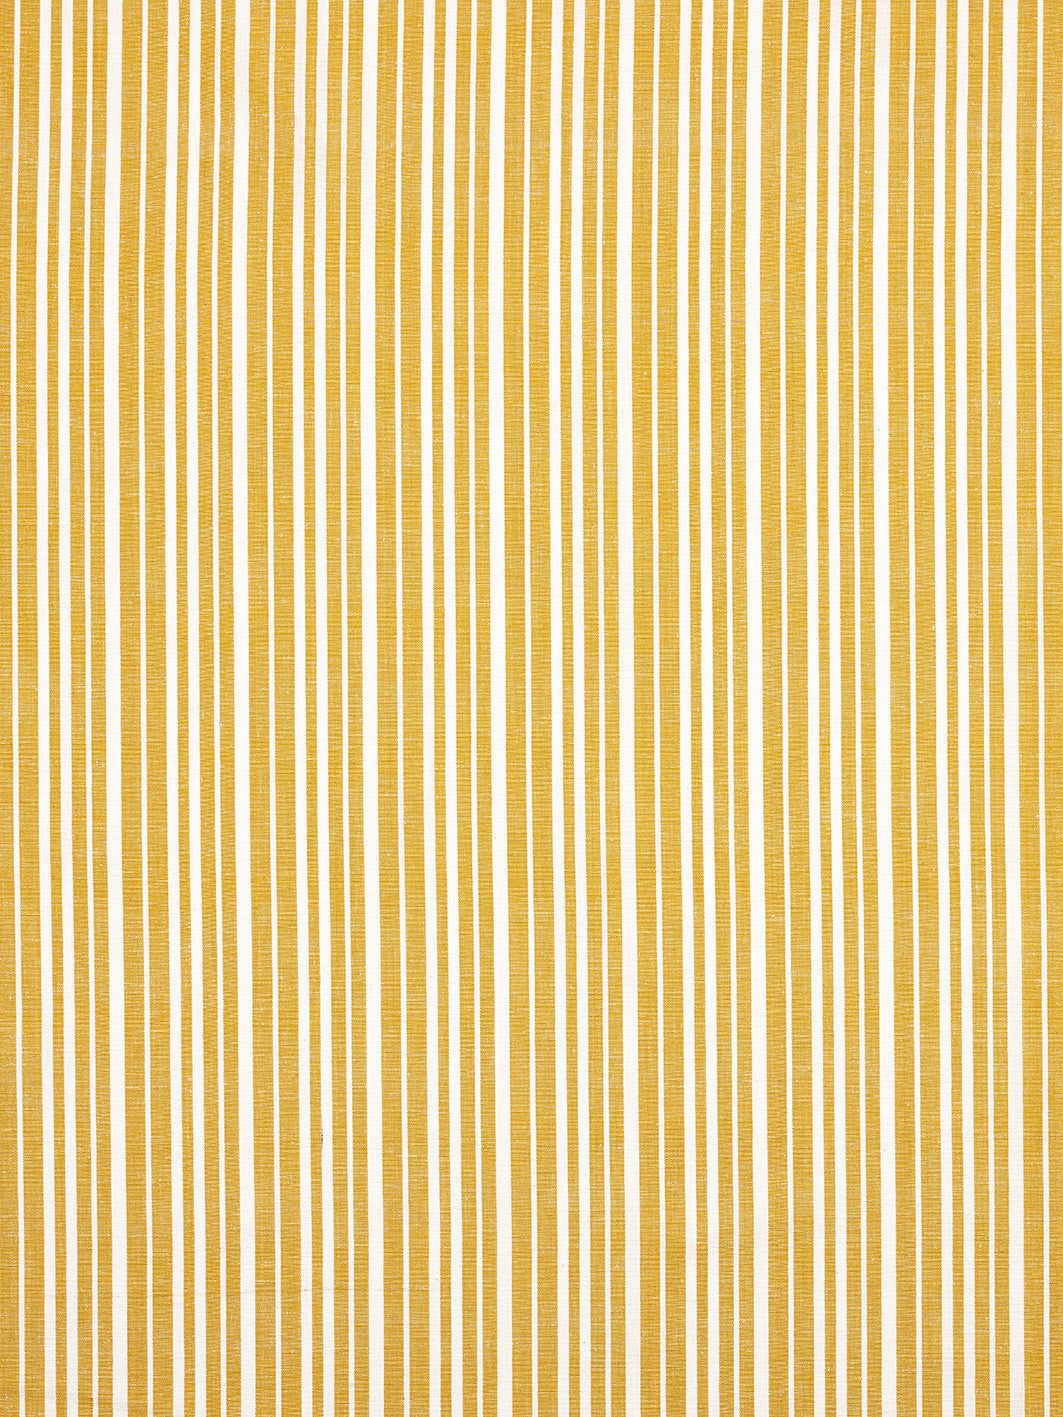 Palermo Ticking Stripe Cotton Linen Home Decor Fabric by the Meter or by the yard for curtains, blinds or upholstery in Mustard Gold ships from Canada (USA)